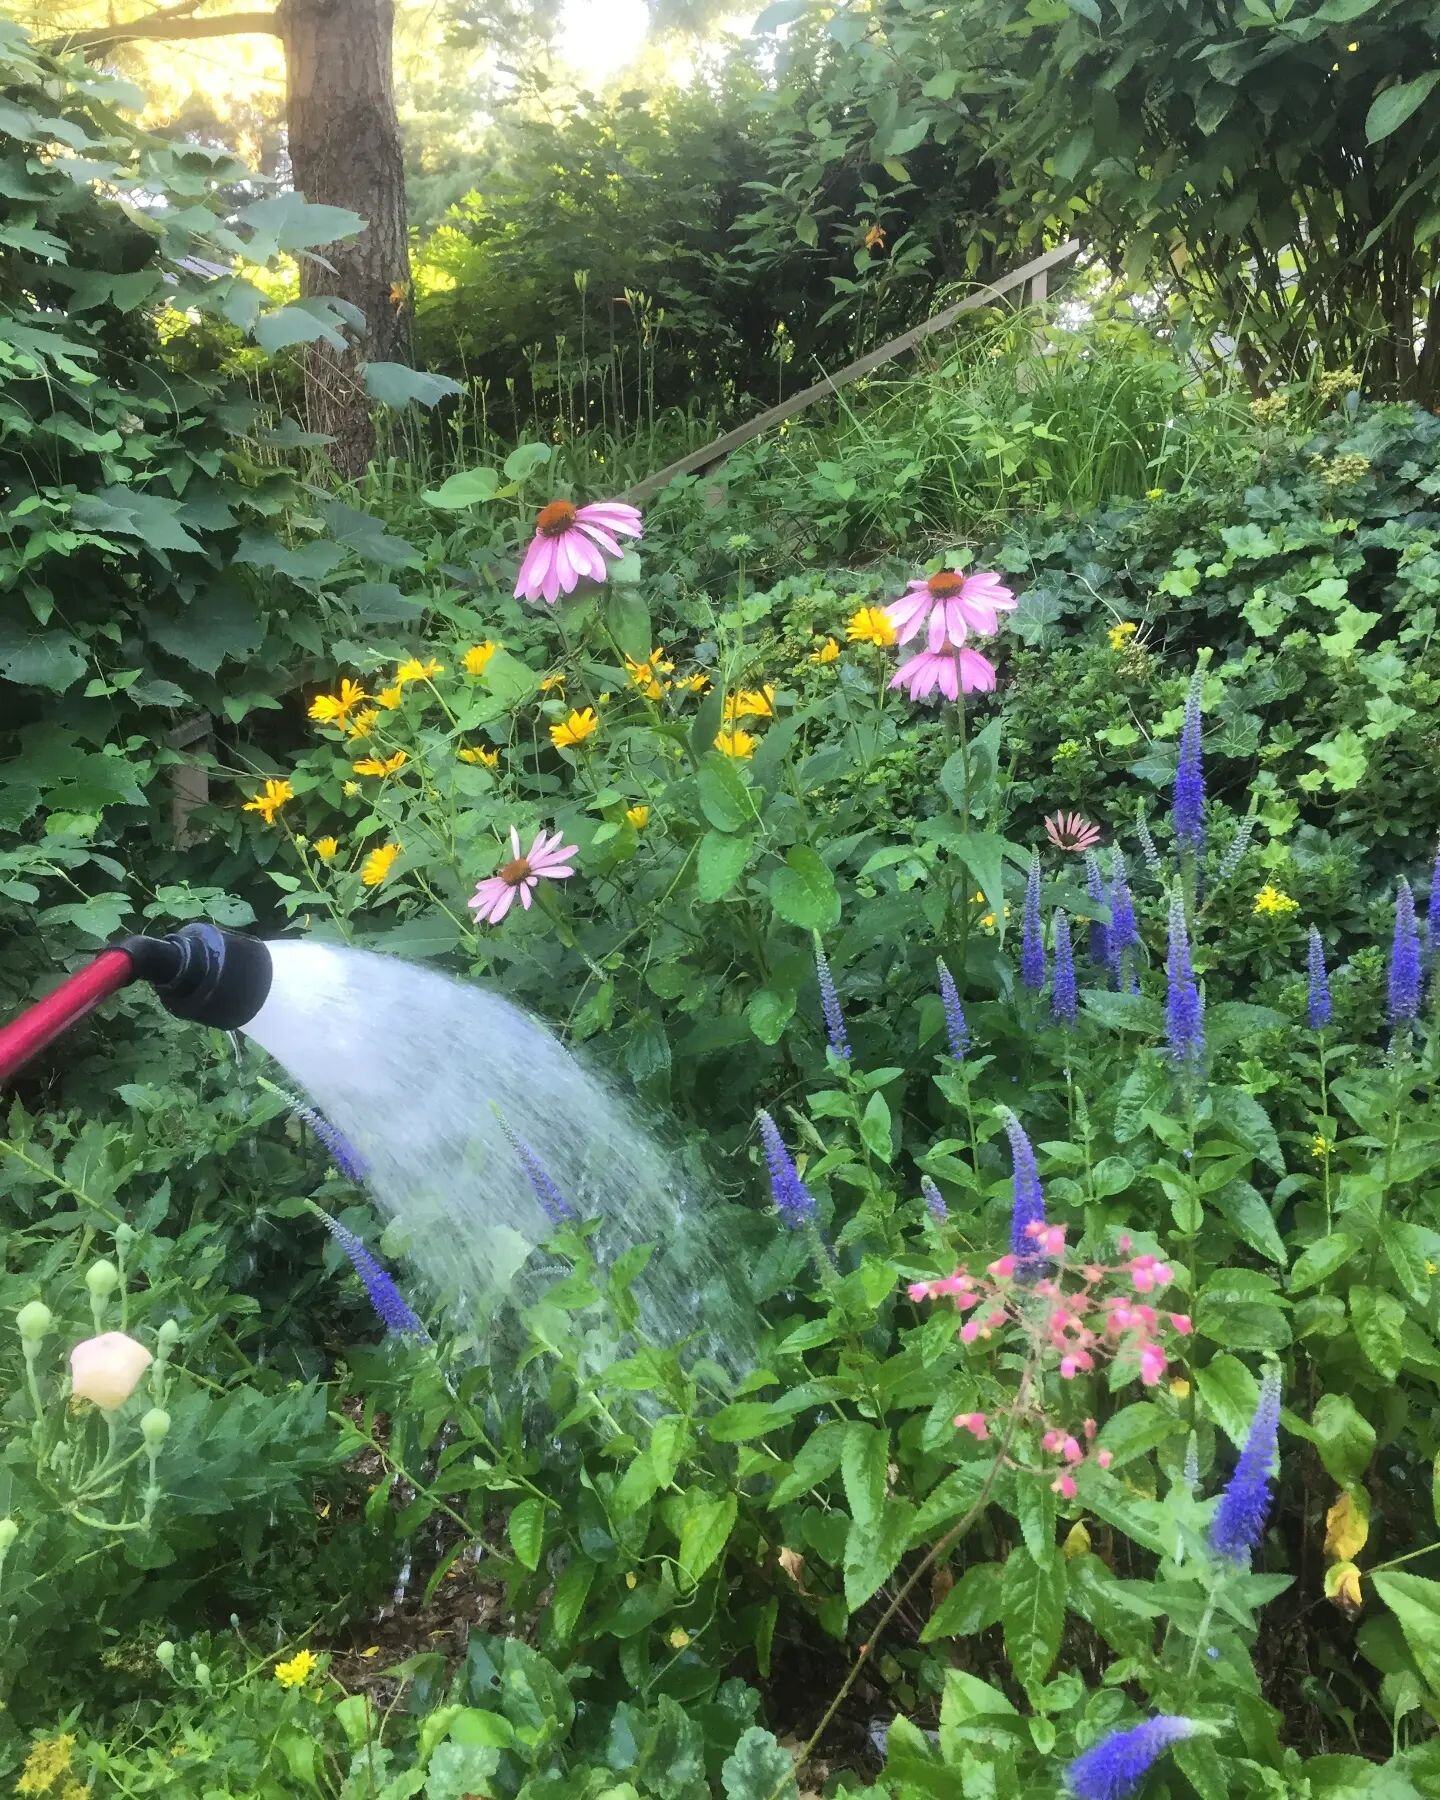 Don't let your plants miss you while you're out of town! We can water your flower beds and containers so they look great when you get back. 

#vacationwatering #desmoinesgardener  #gardeningservices #gardenwatering